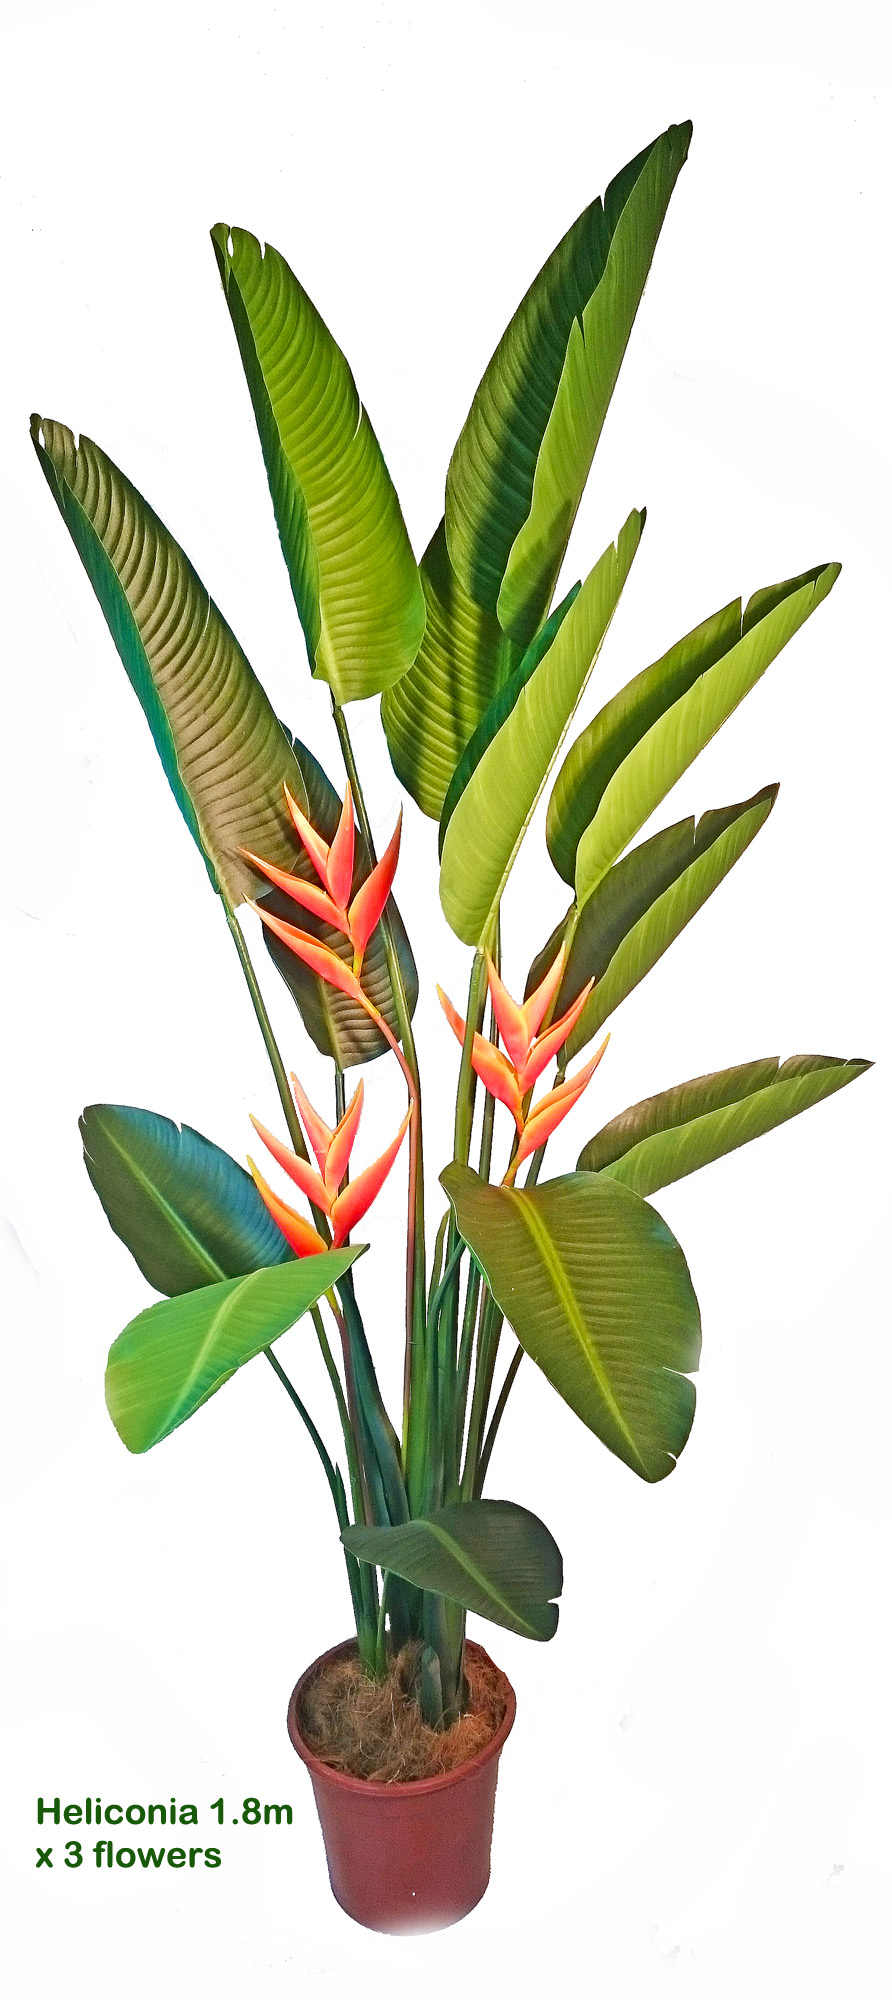 Heliconia Palms- Flowering 1.6m with 2 flowers